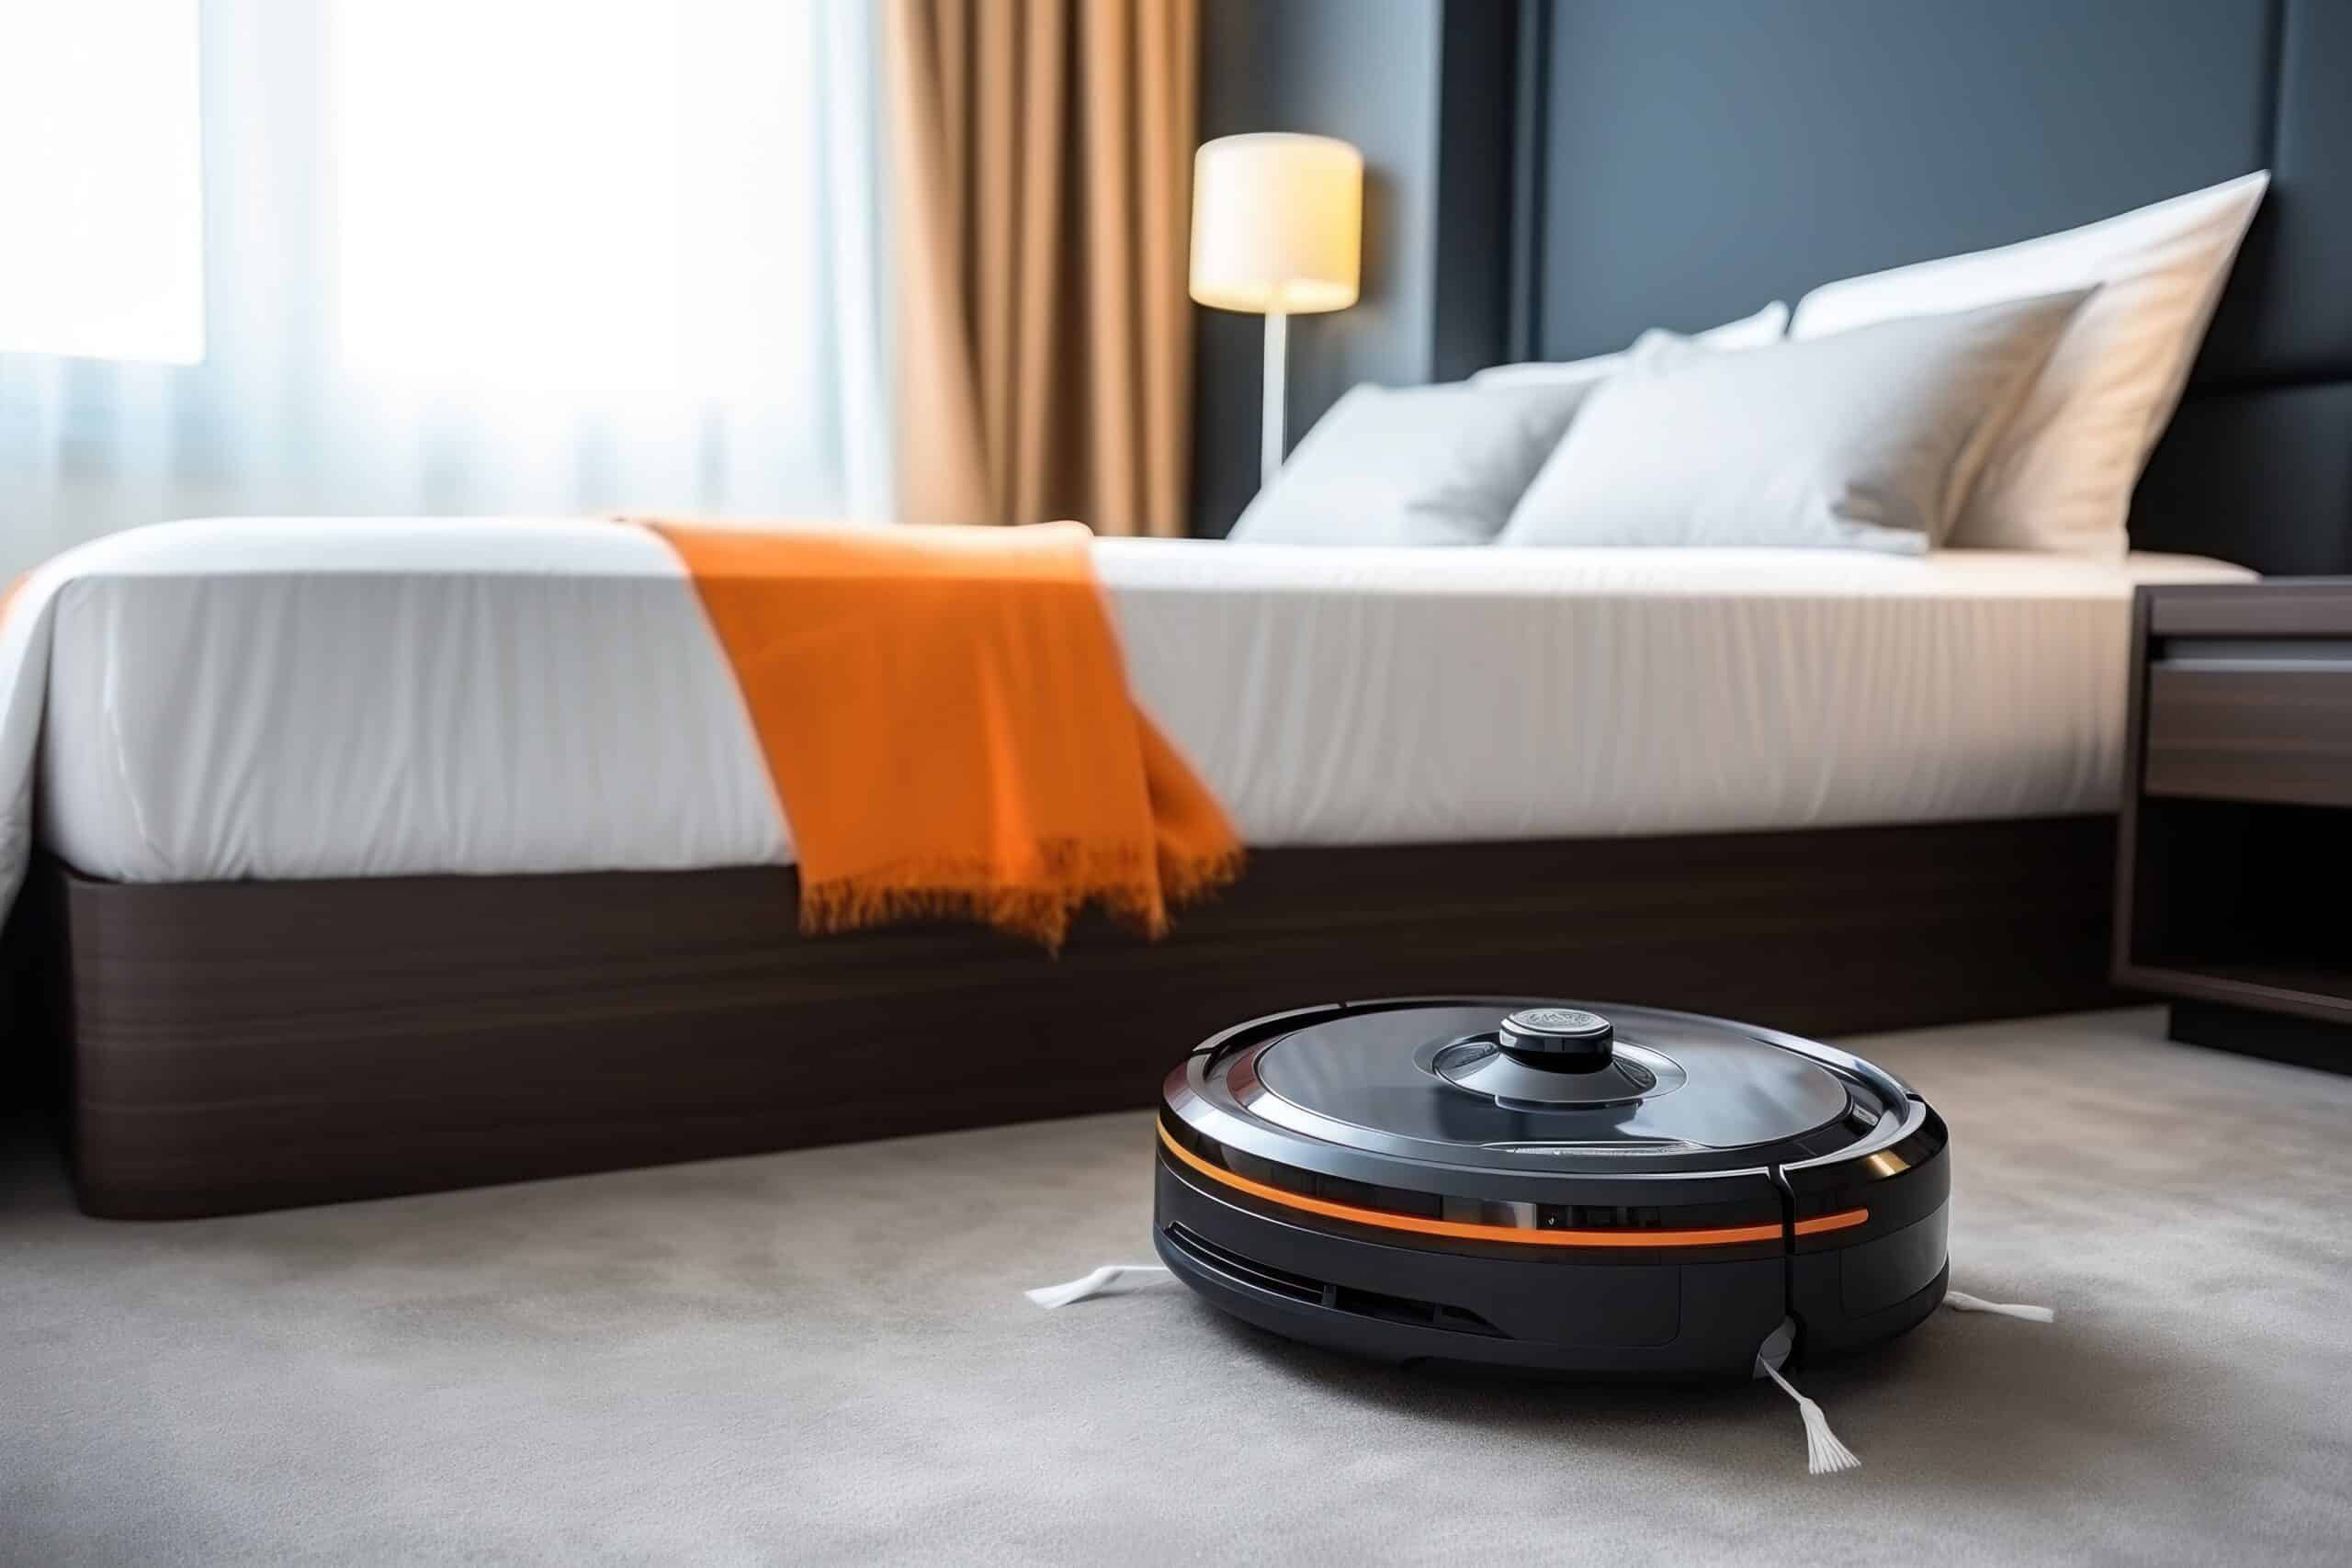 www.appr.com : Does A Robot Vacuum Cleaner Work?